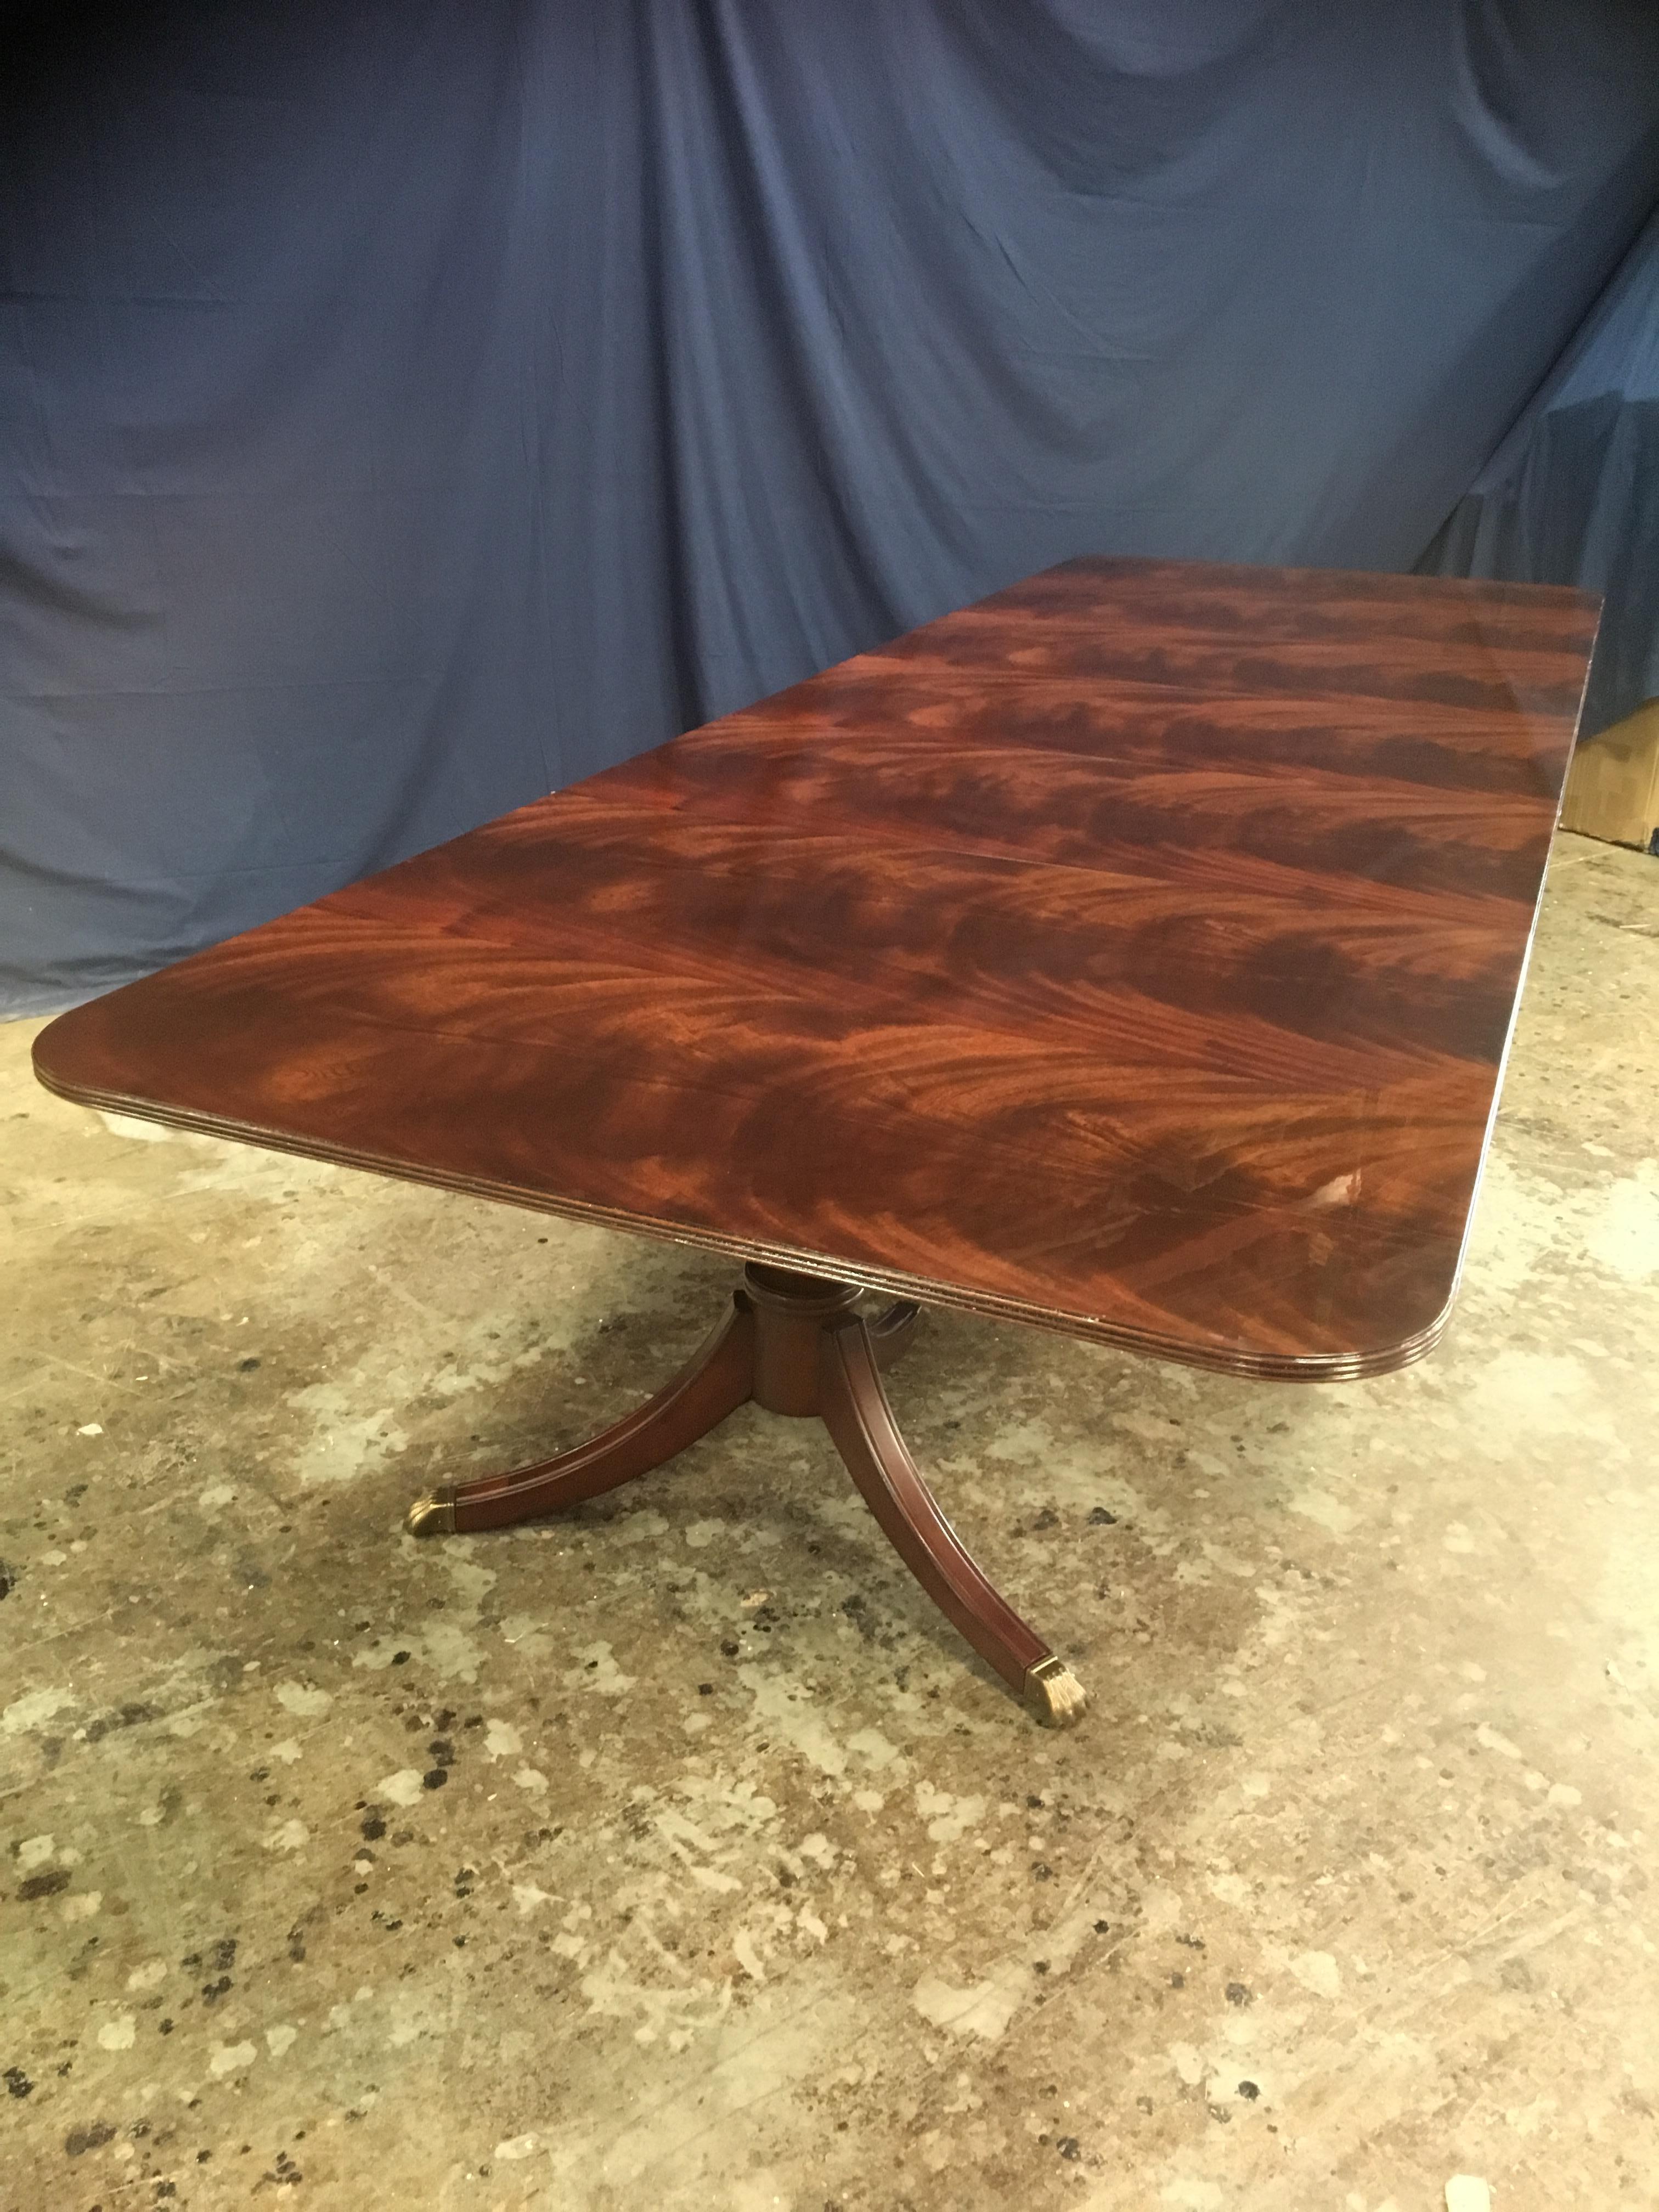 This is a made-to-order large traditional mahogany banquet/dining table made in the Leighton Hall shop. It is modeled after the understated swirly crotch mahogany tables made in the 1800s and early 1900s. It features a field of slip-matched swirly